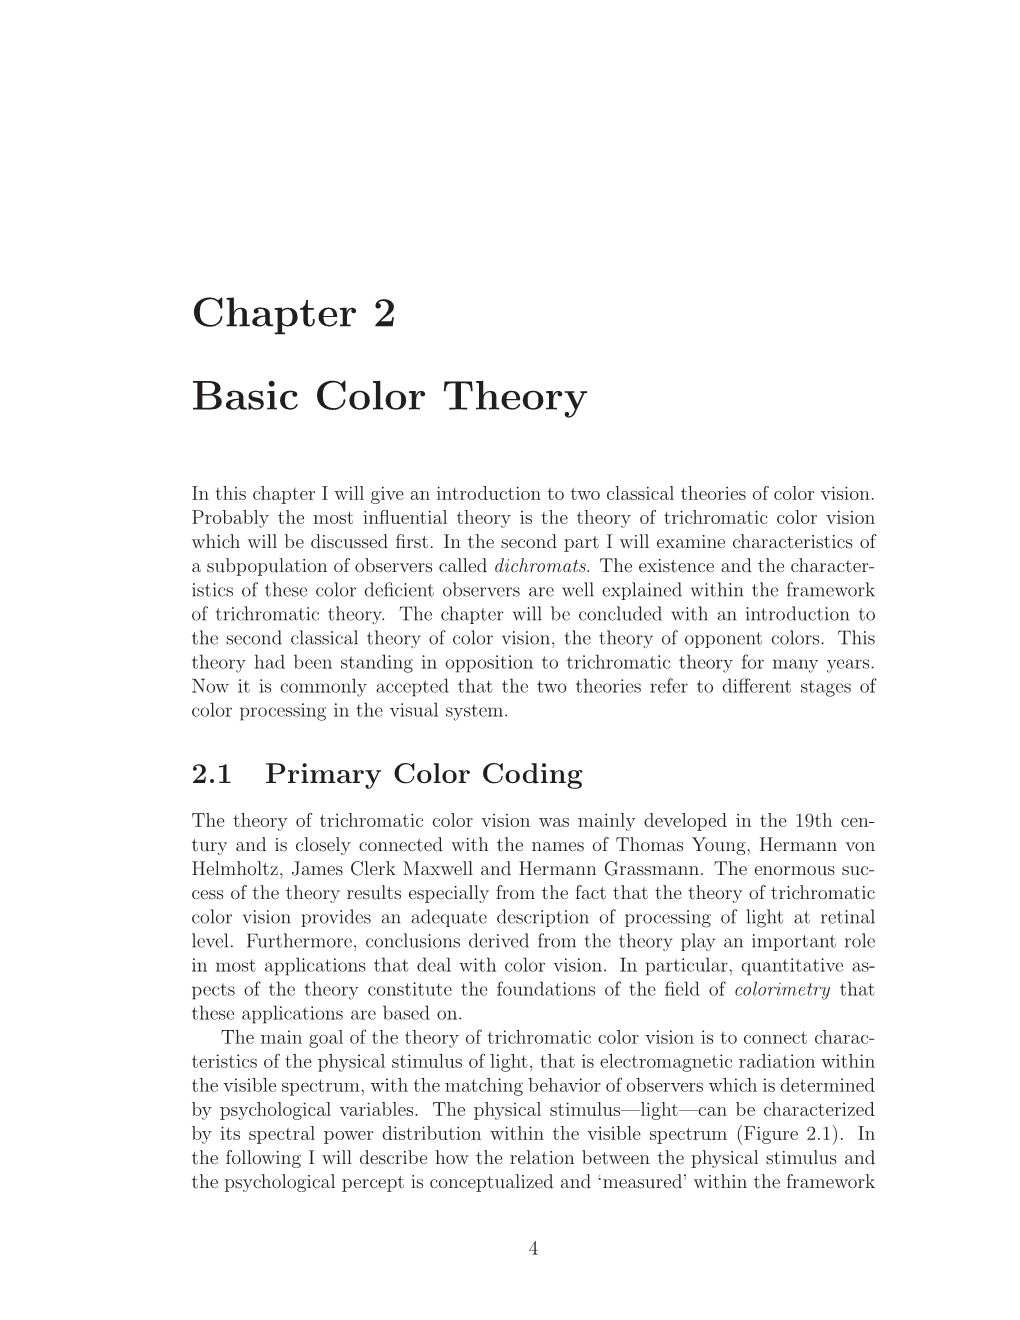 Chapter 2 Basic Color Theory